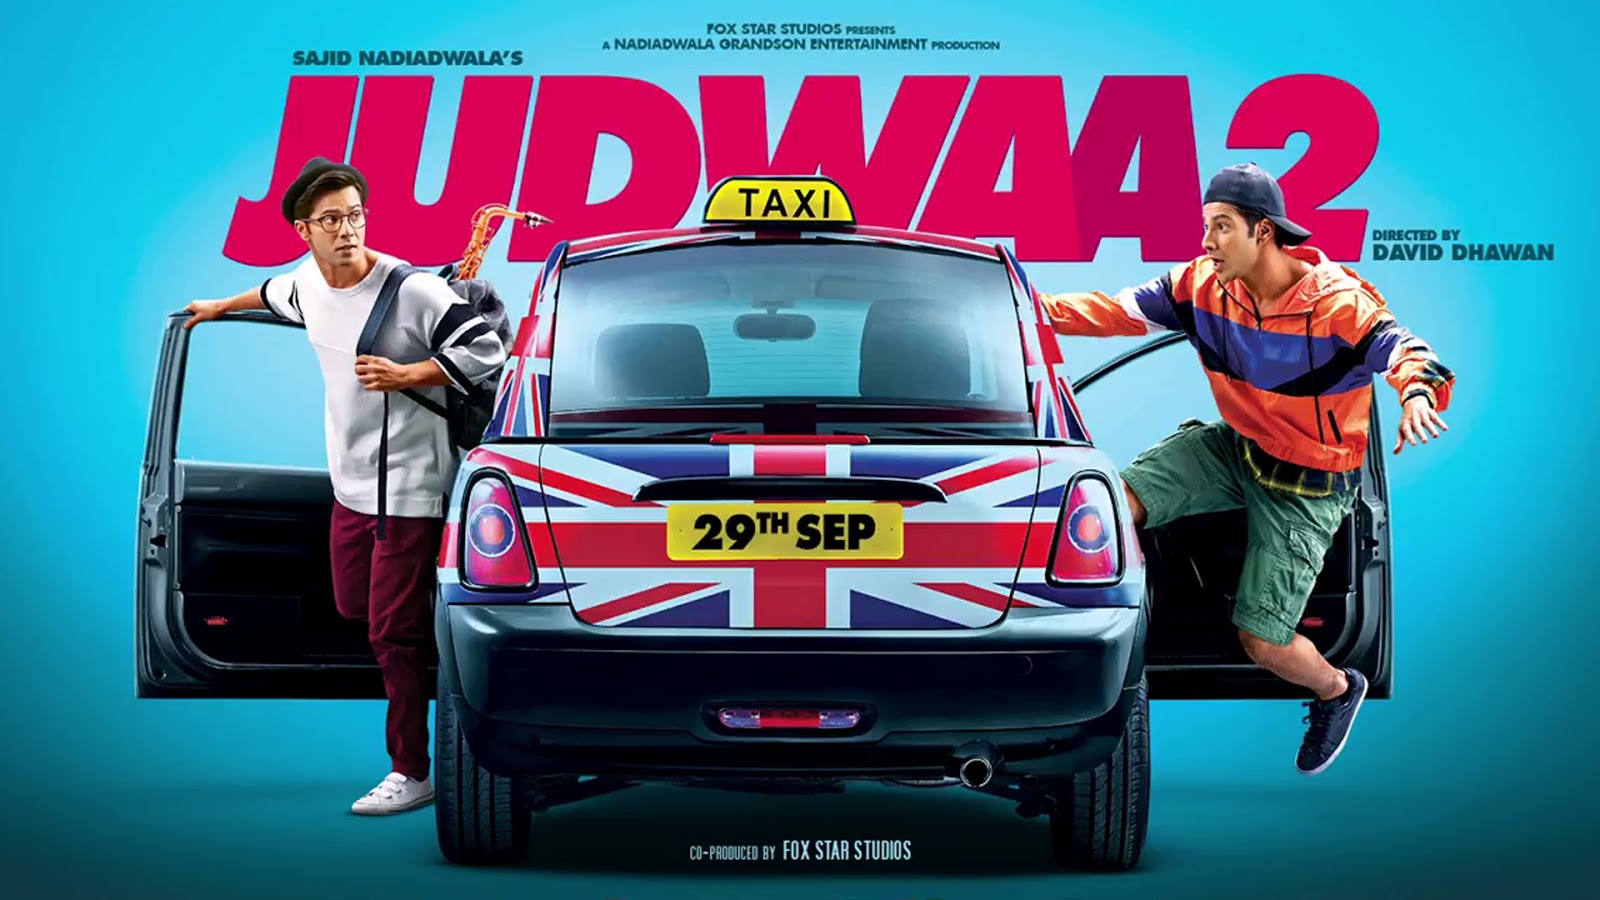 Judwaa 2 Movie Hd Wallpapers Download Free 1080p Colorfullhdwallpapers Upcoming Latest